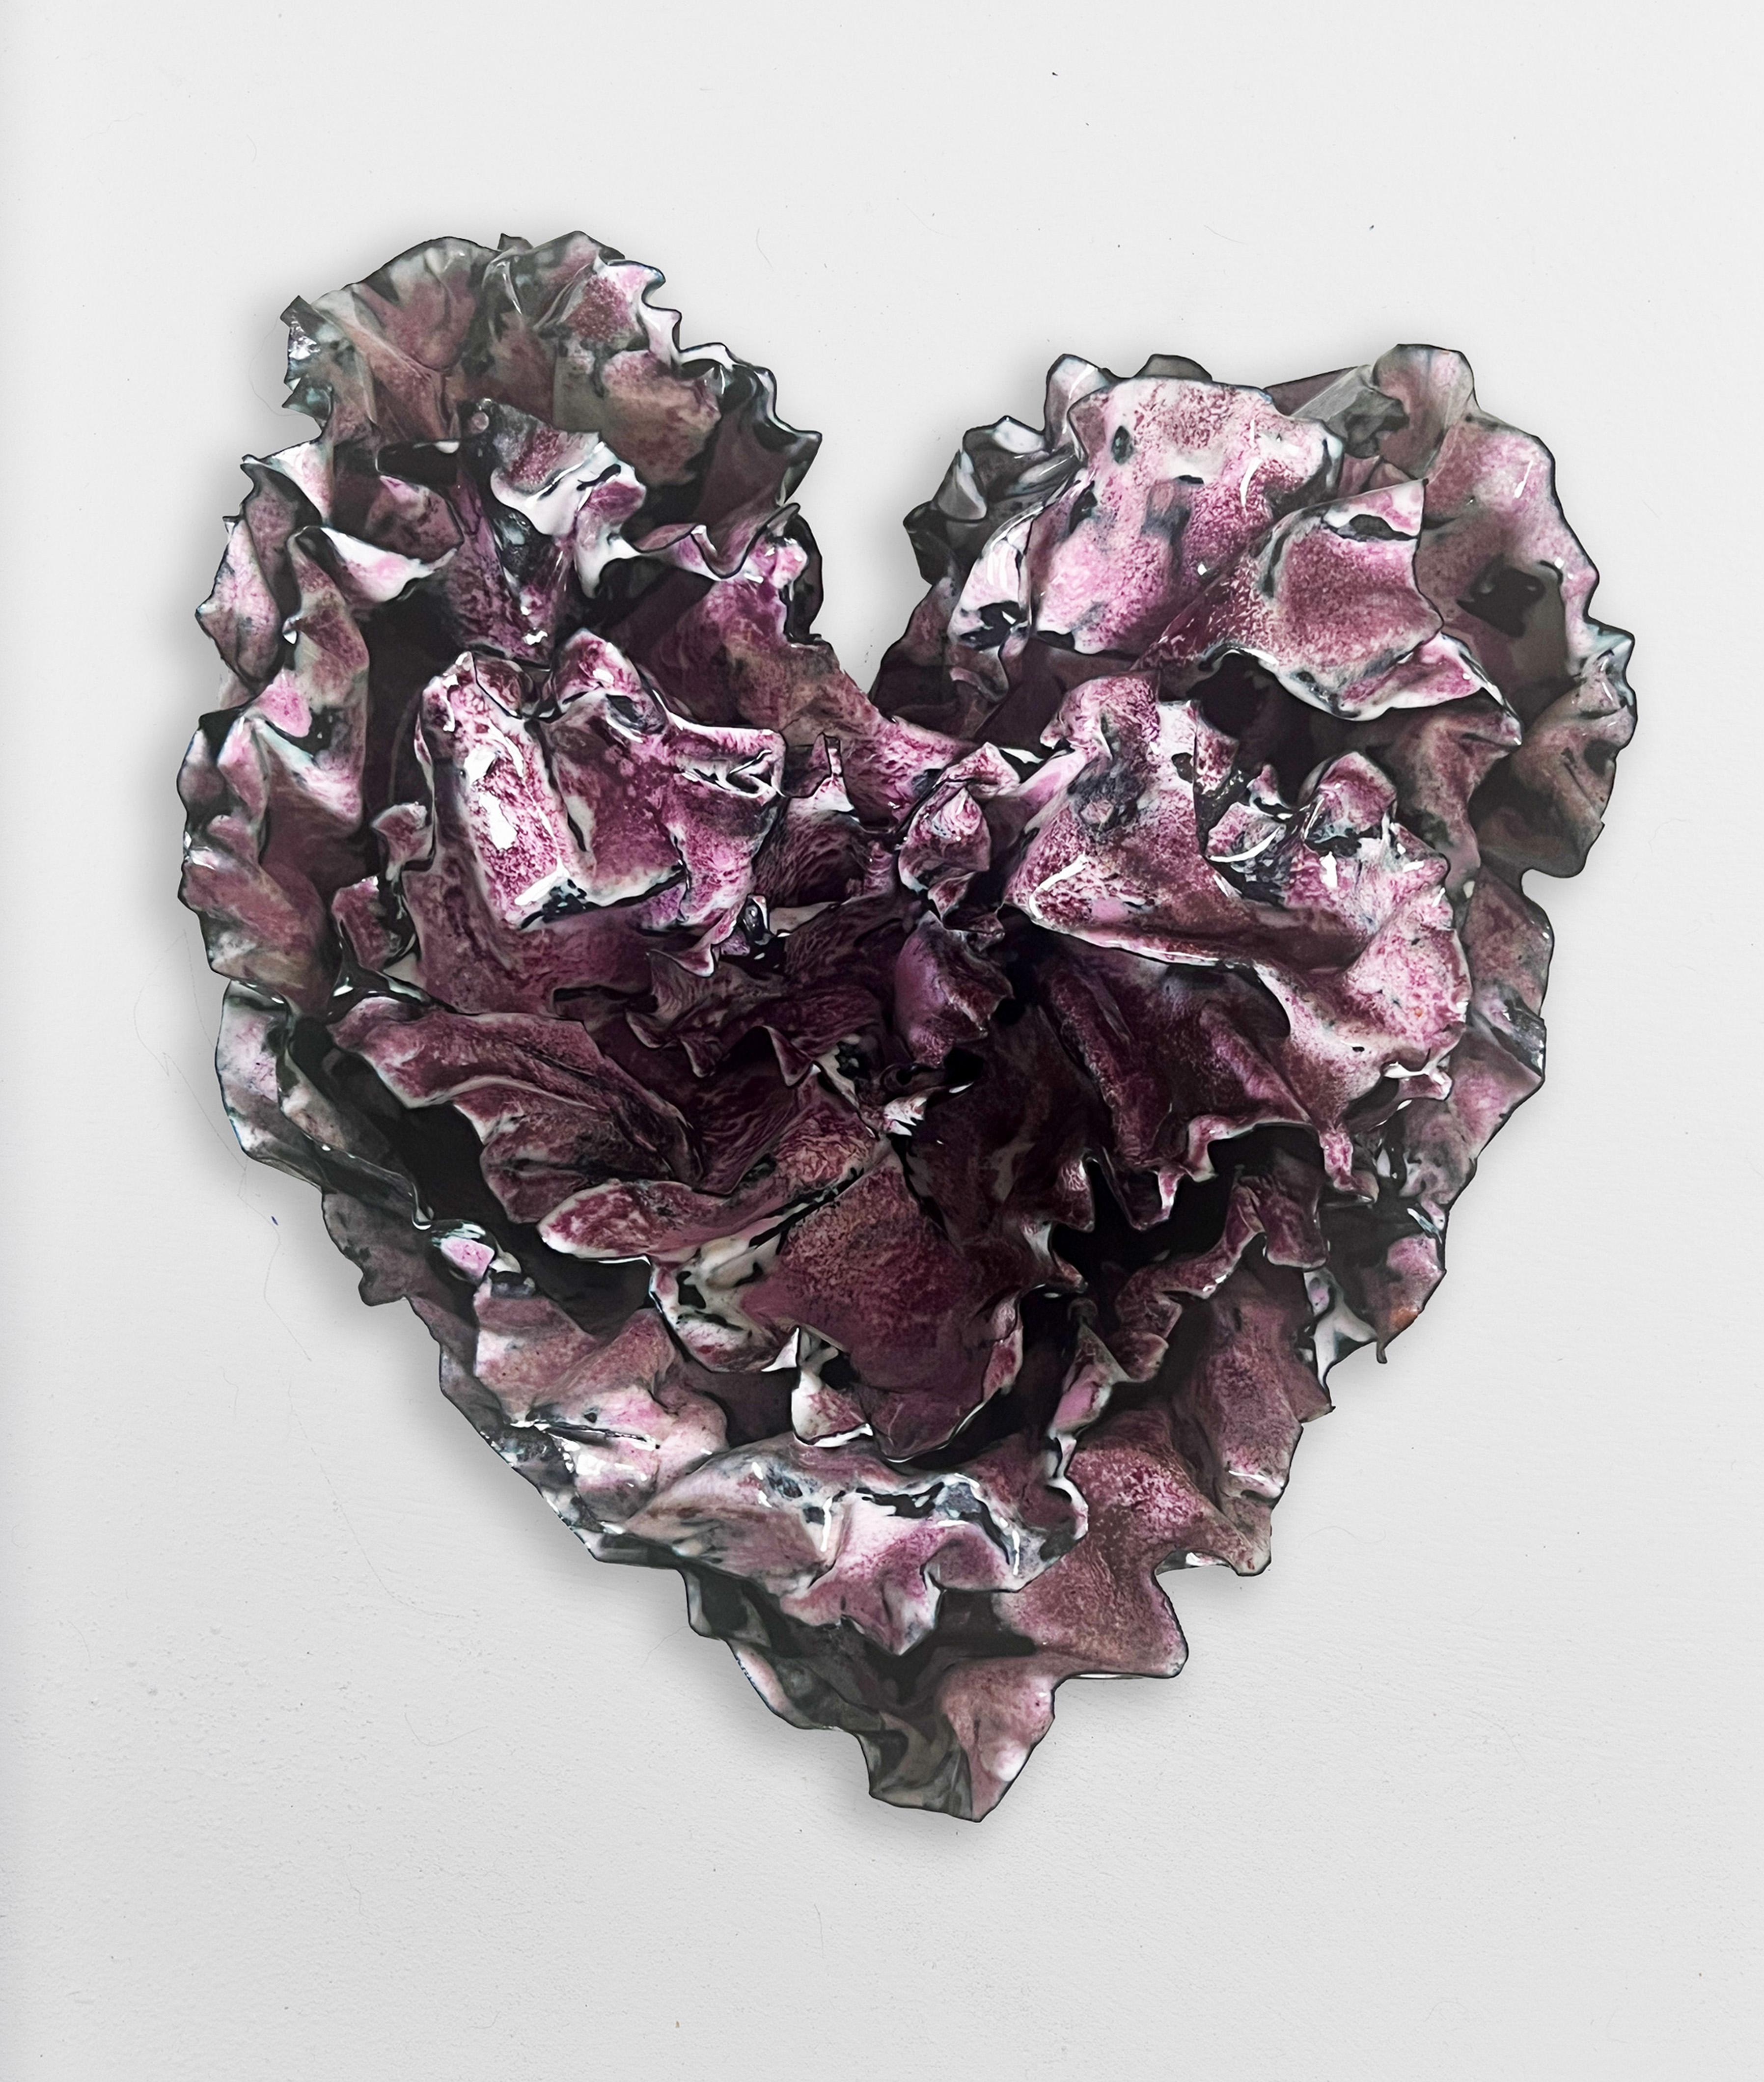 The richness of color on this heart is so deep that it feels like a purple.  It was created with a white base and the purples and pinks were fired in one firing, allowing the colors to merge into hues of rich colors.  The pink is very saturated with